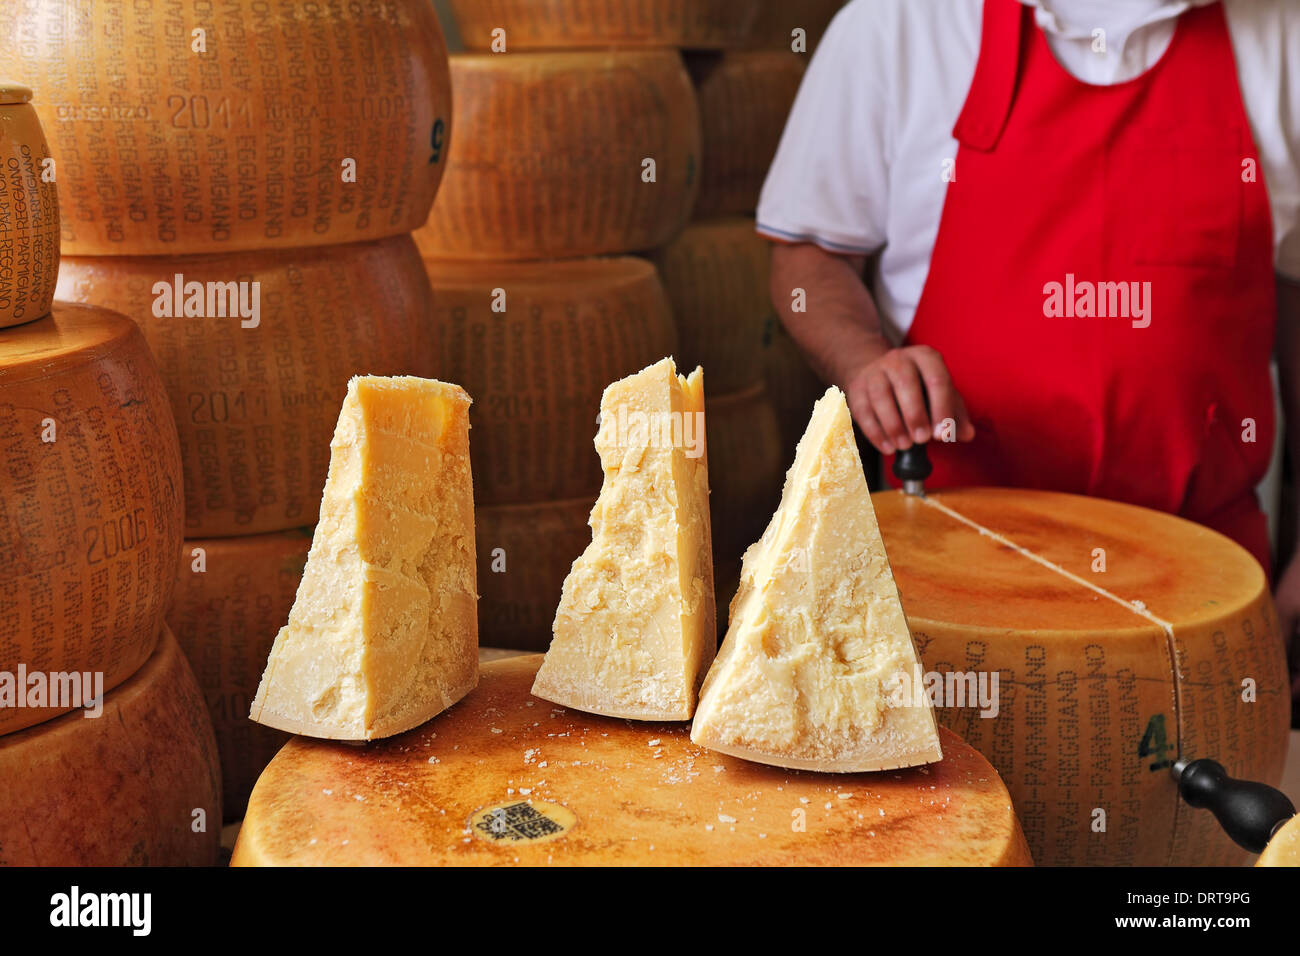 Cut pieces and wheels of Parmesan - italian cheese made from raw cow's milk. Stock Photo